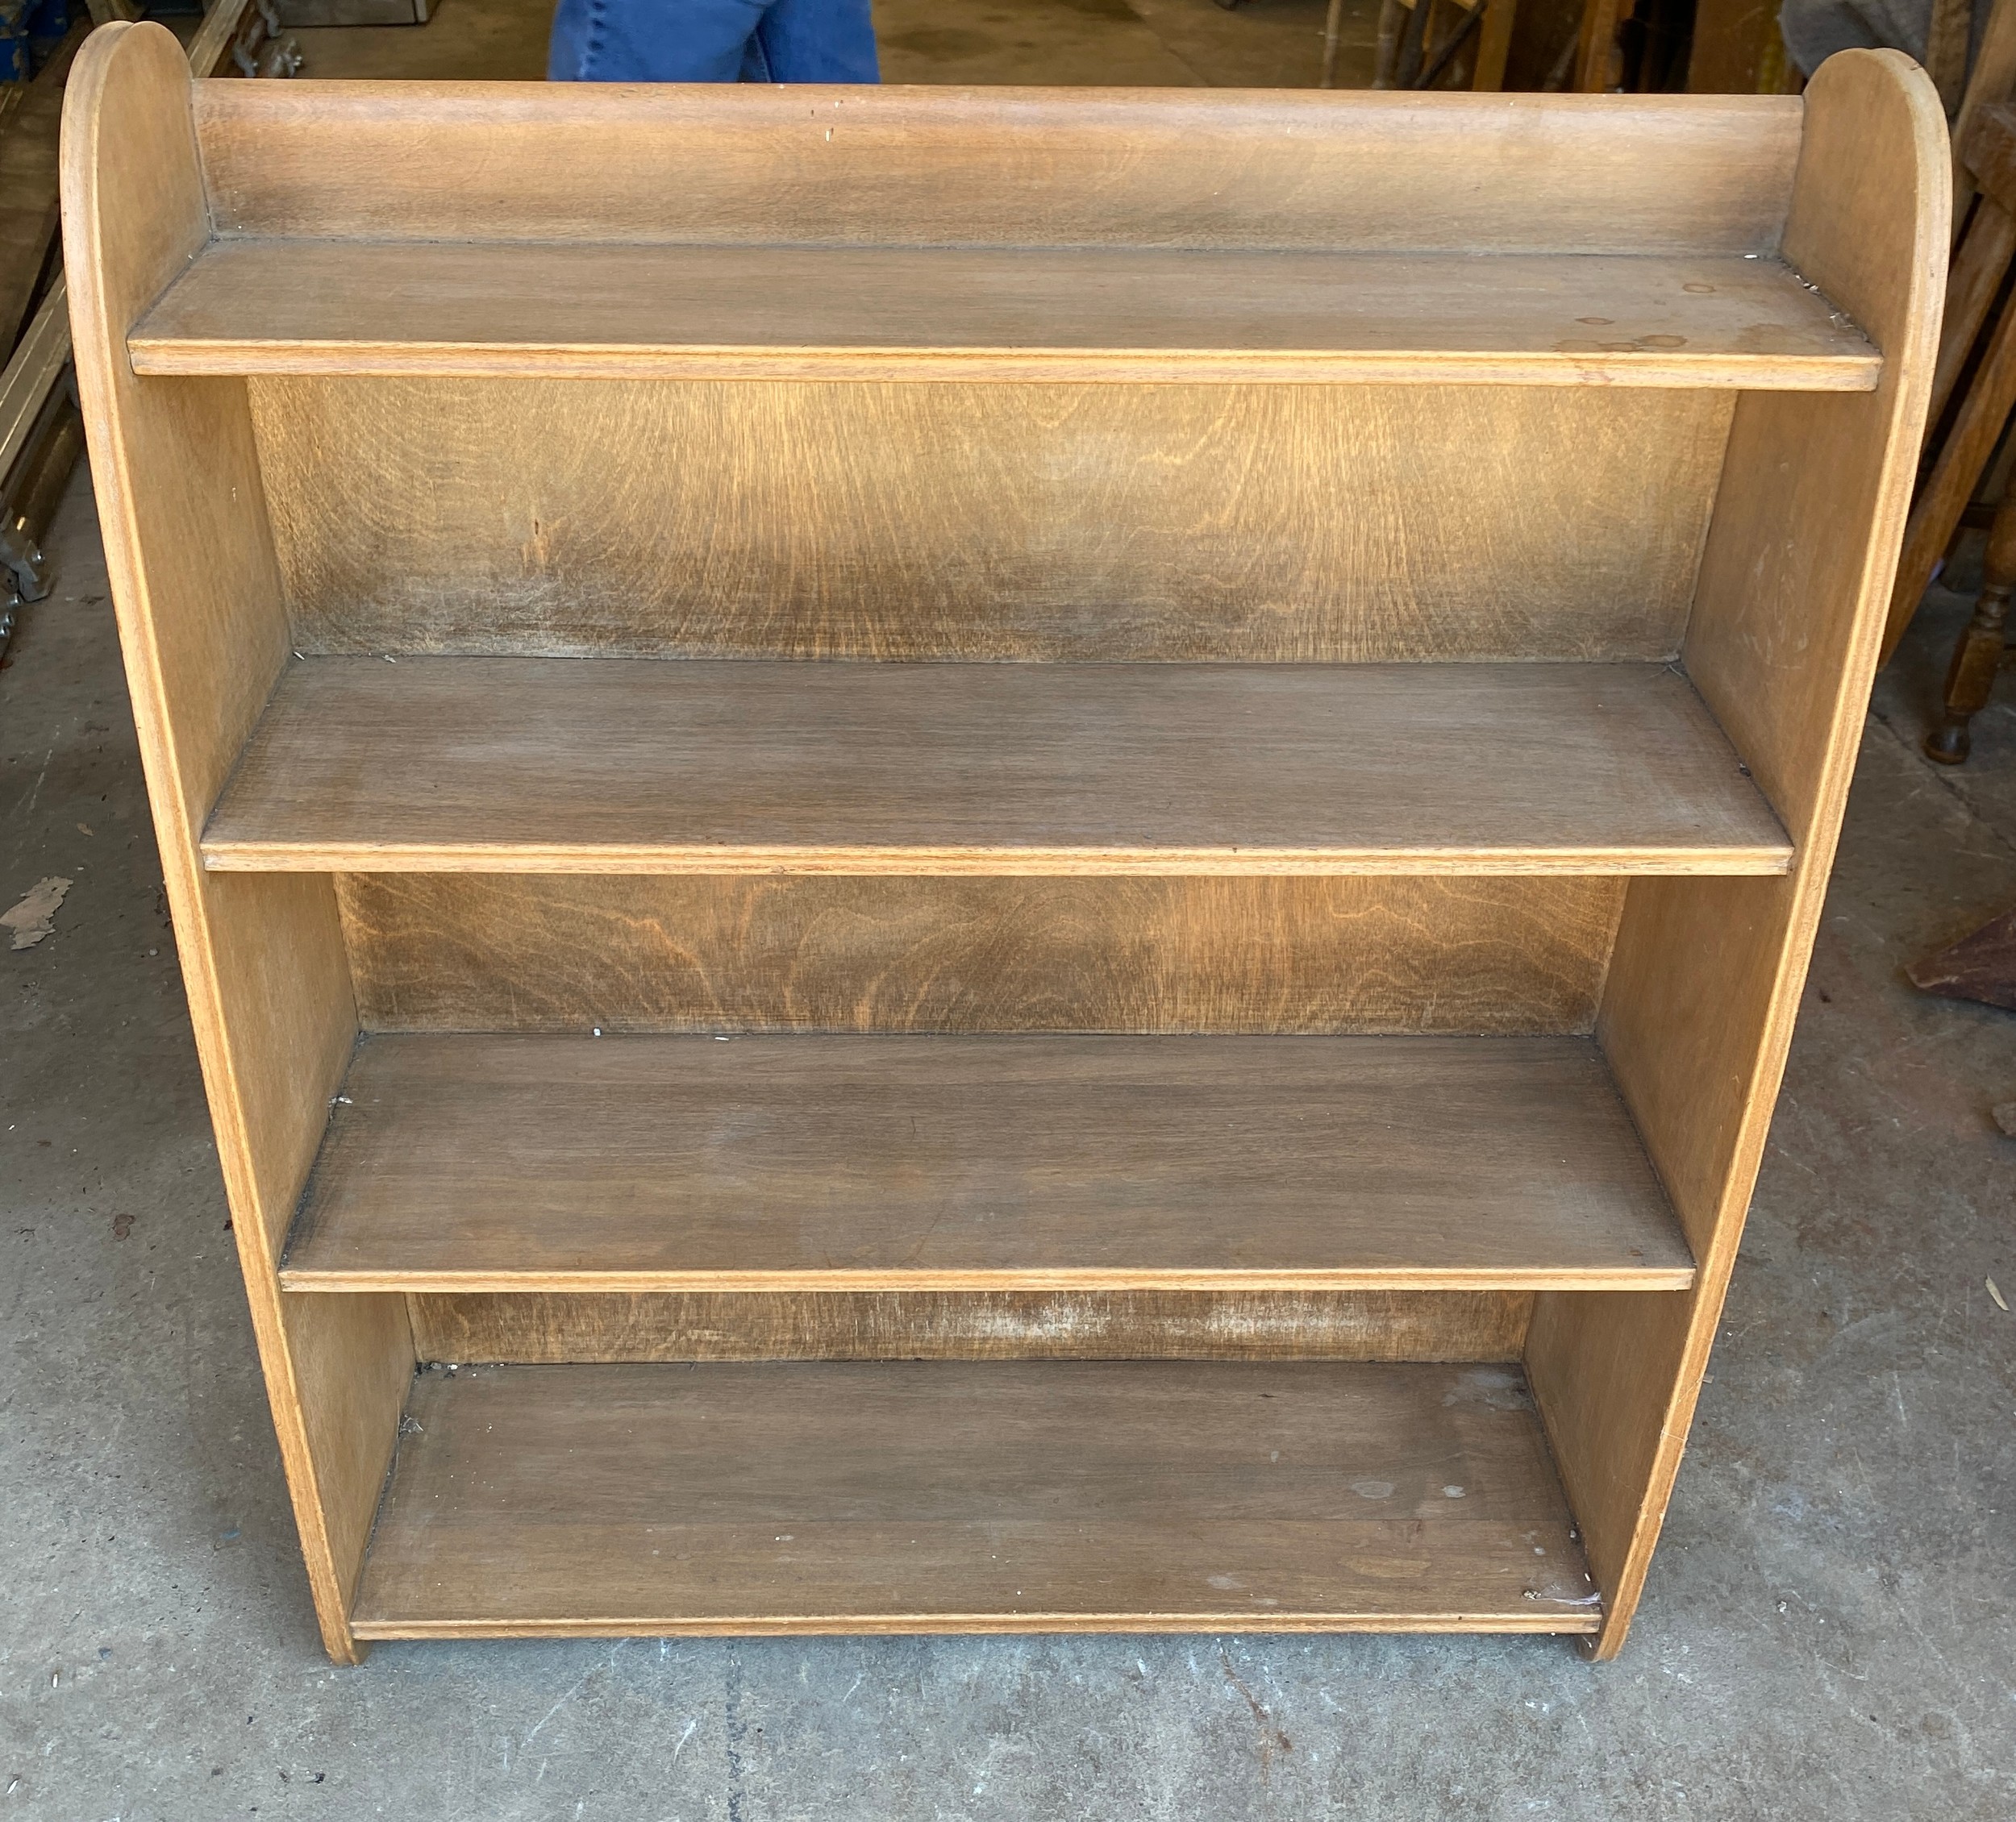 4 Shelf wall hanging open front oak bookcase by Remploy measures approximately 35 inches tall 30